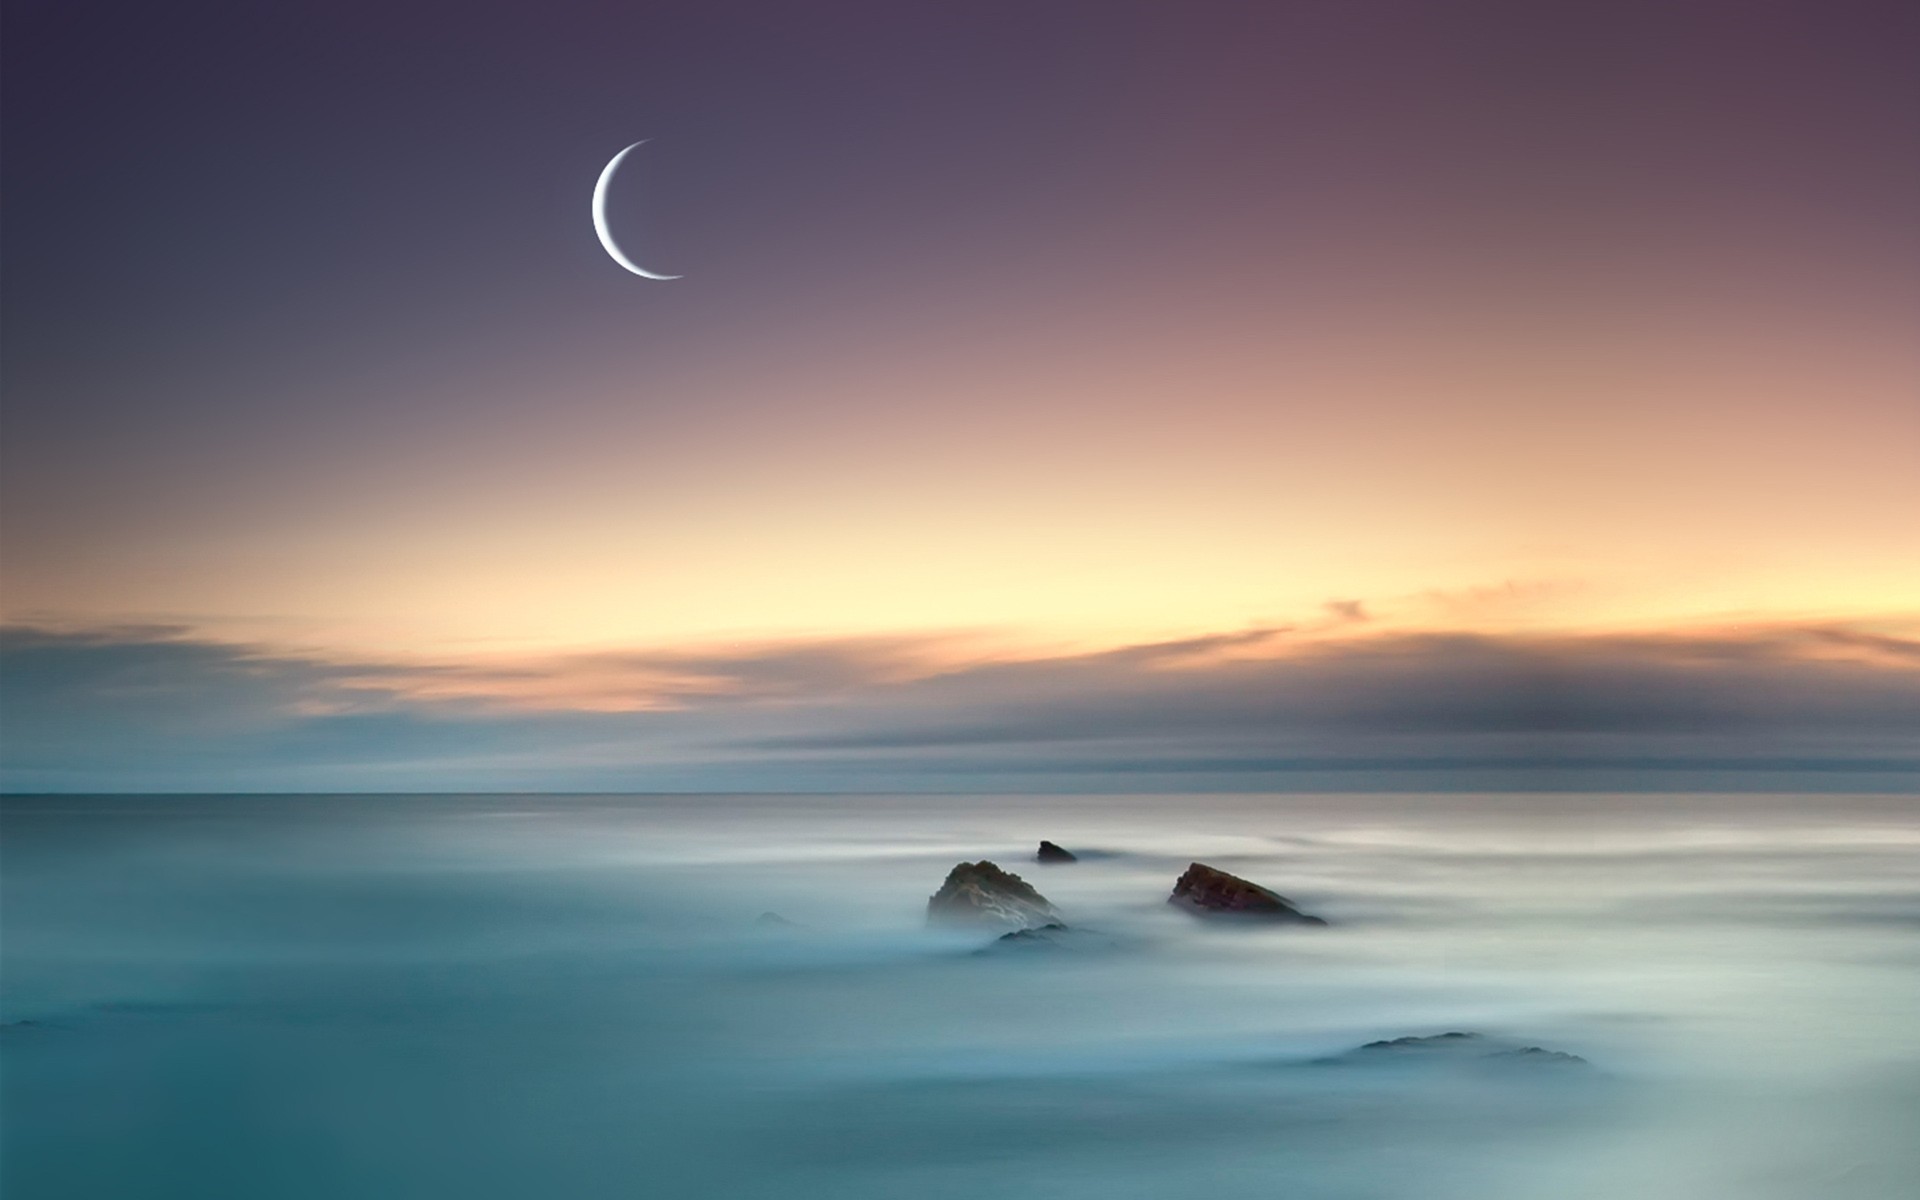 Moon Sea, HD Nature, 4k Wallpaper, Image, Background, Photo and Picture